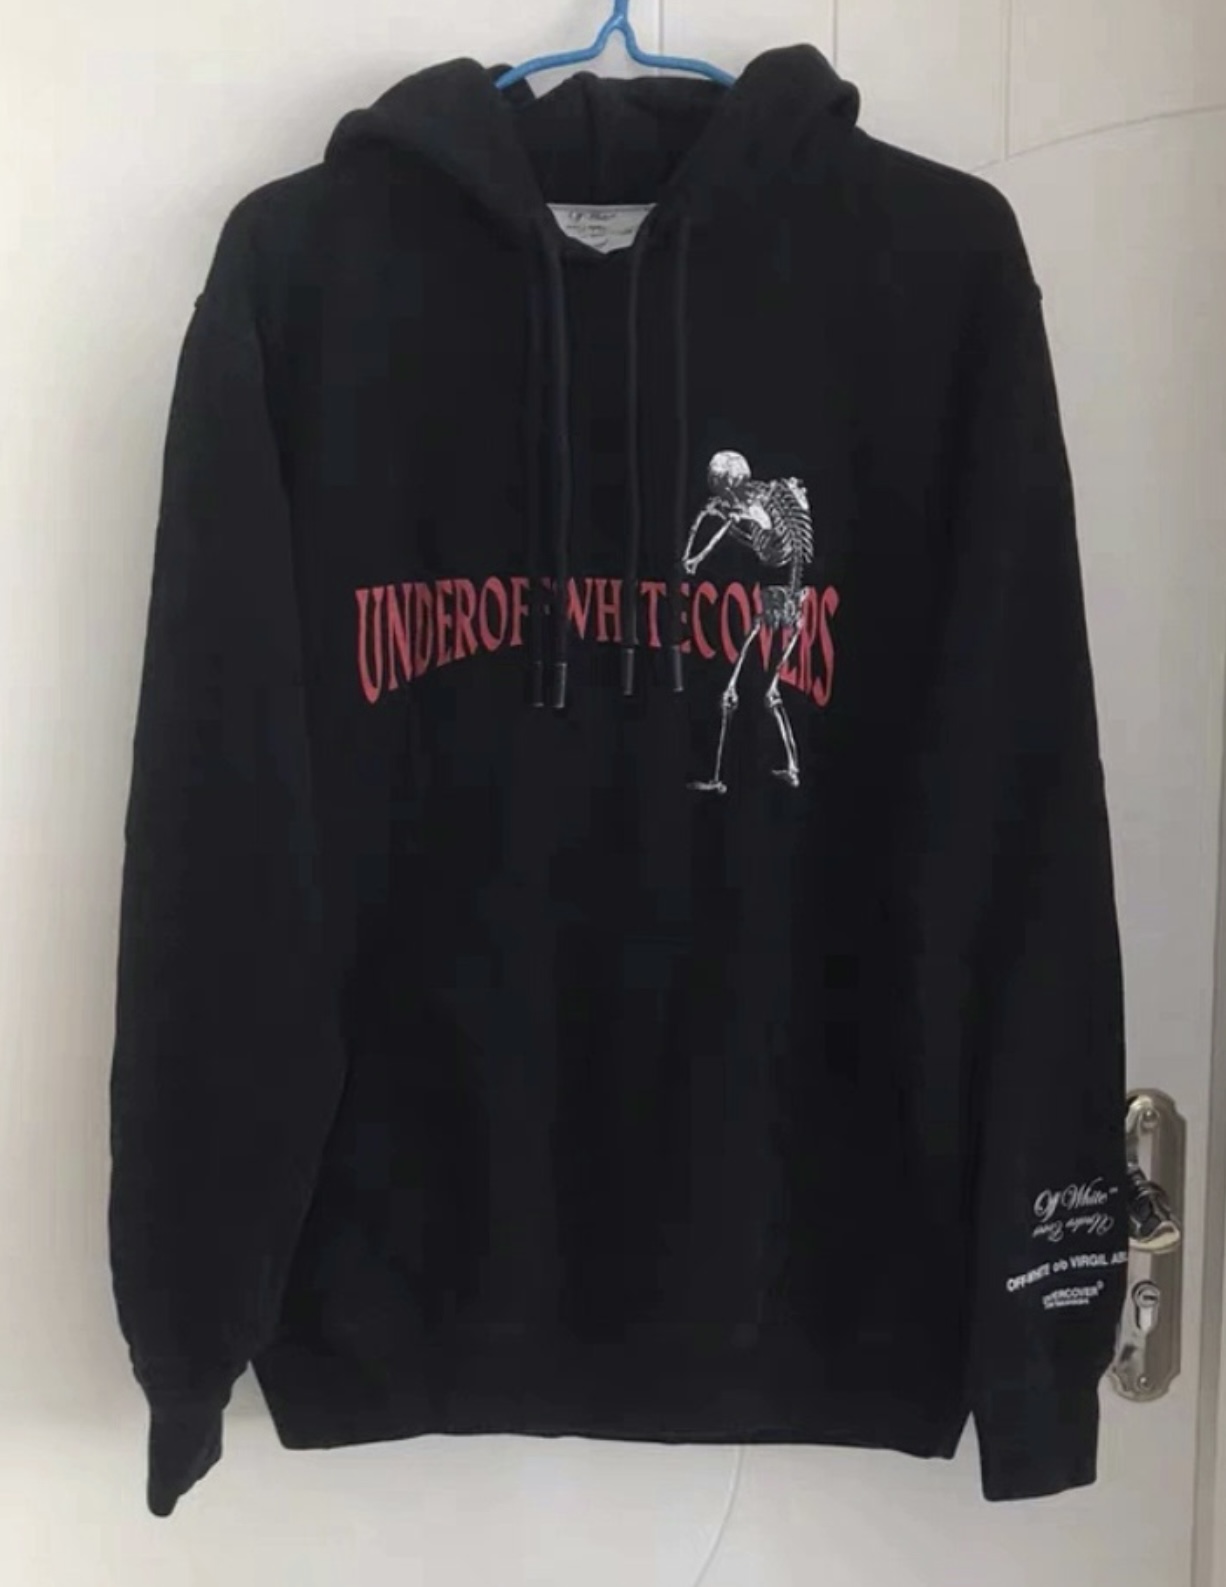 Undercover x Off-white hoodie - 2